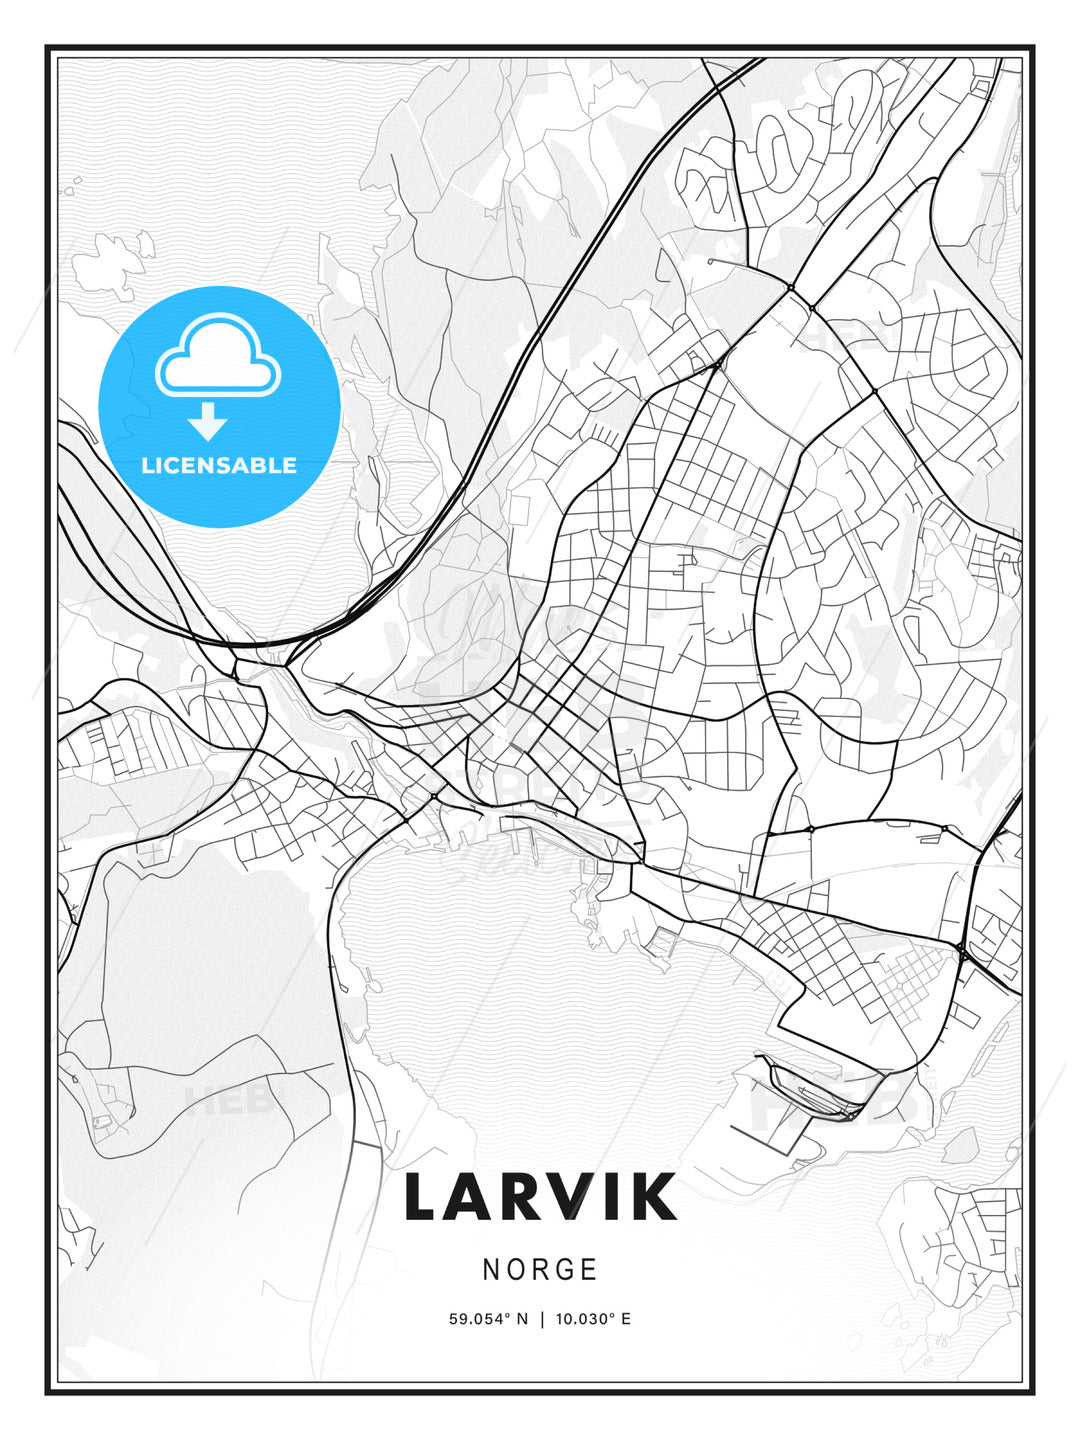 Larvik, Norway, Modern Print Template in Various Formats - HEBSTREITS Sketches